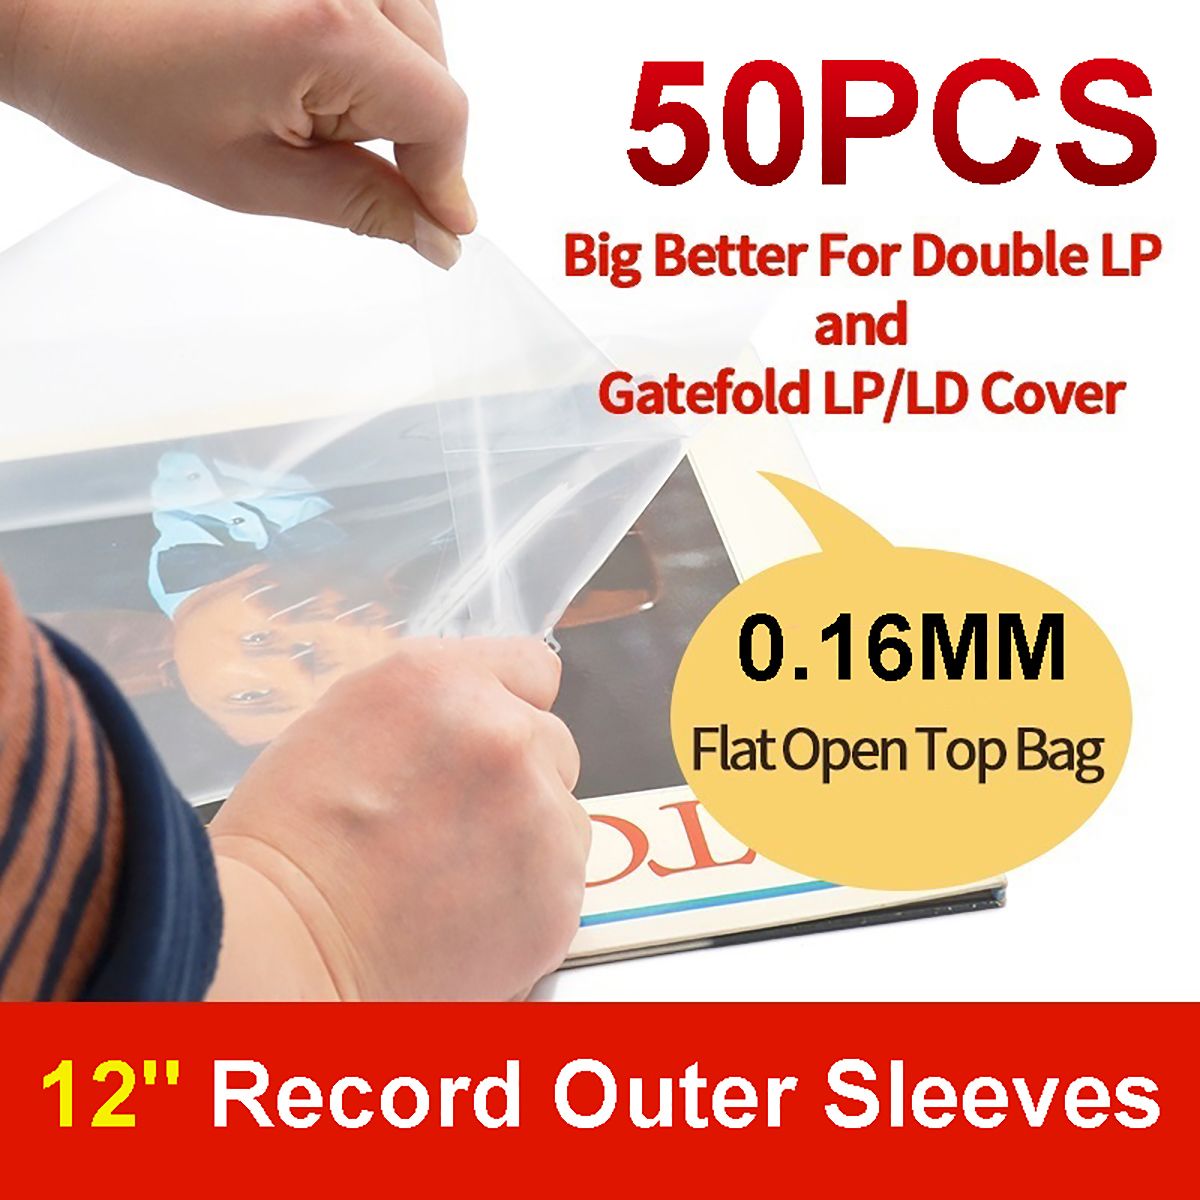 30-Flat-Open-Top-Bag-67Mil-Strong-Cover-Plastic-Vinyl-Record-Outer-Sleeves-for-12-Double--Gatefold-2-1732671